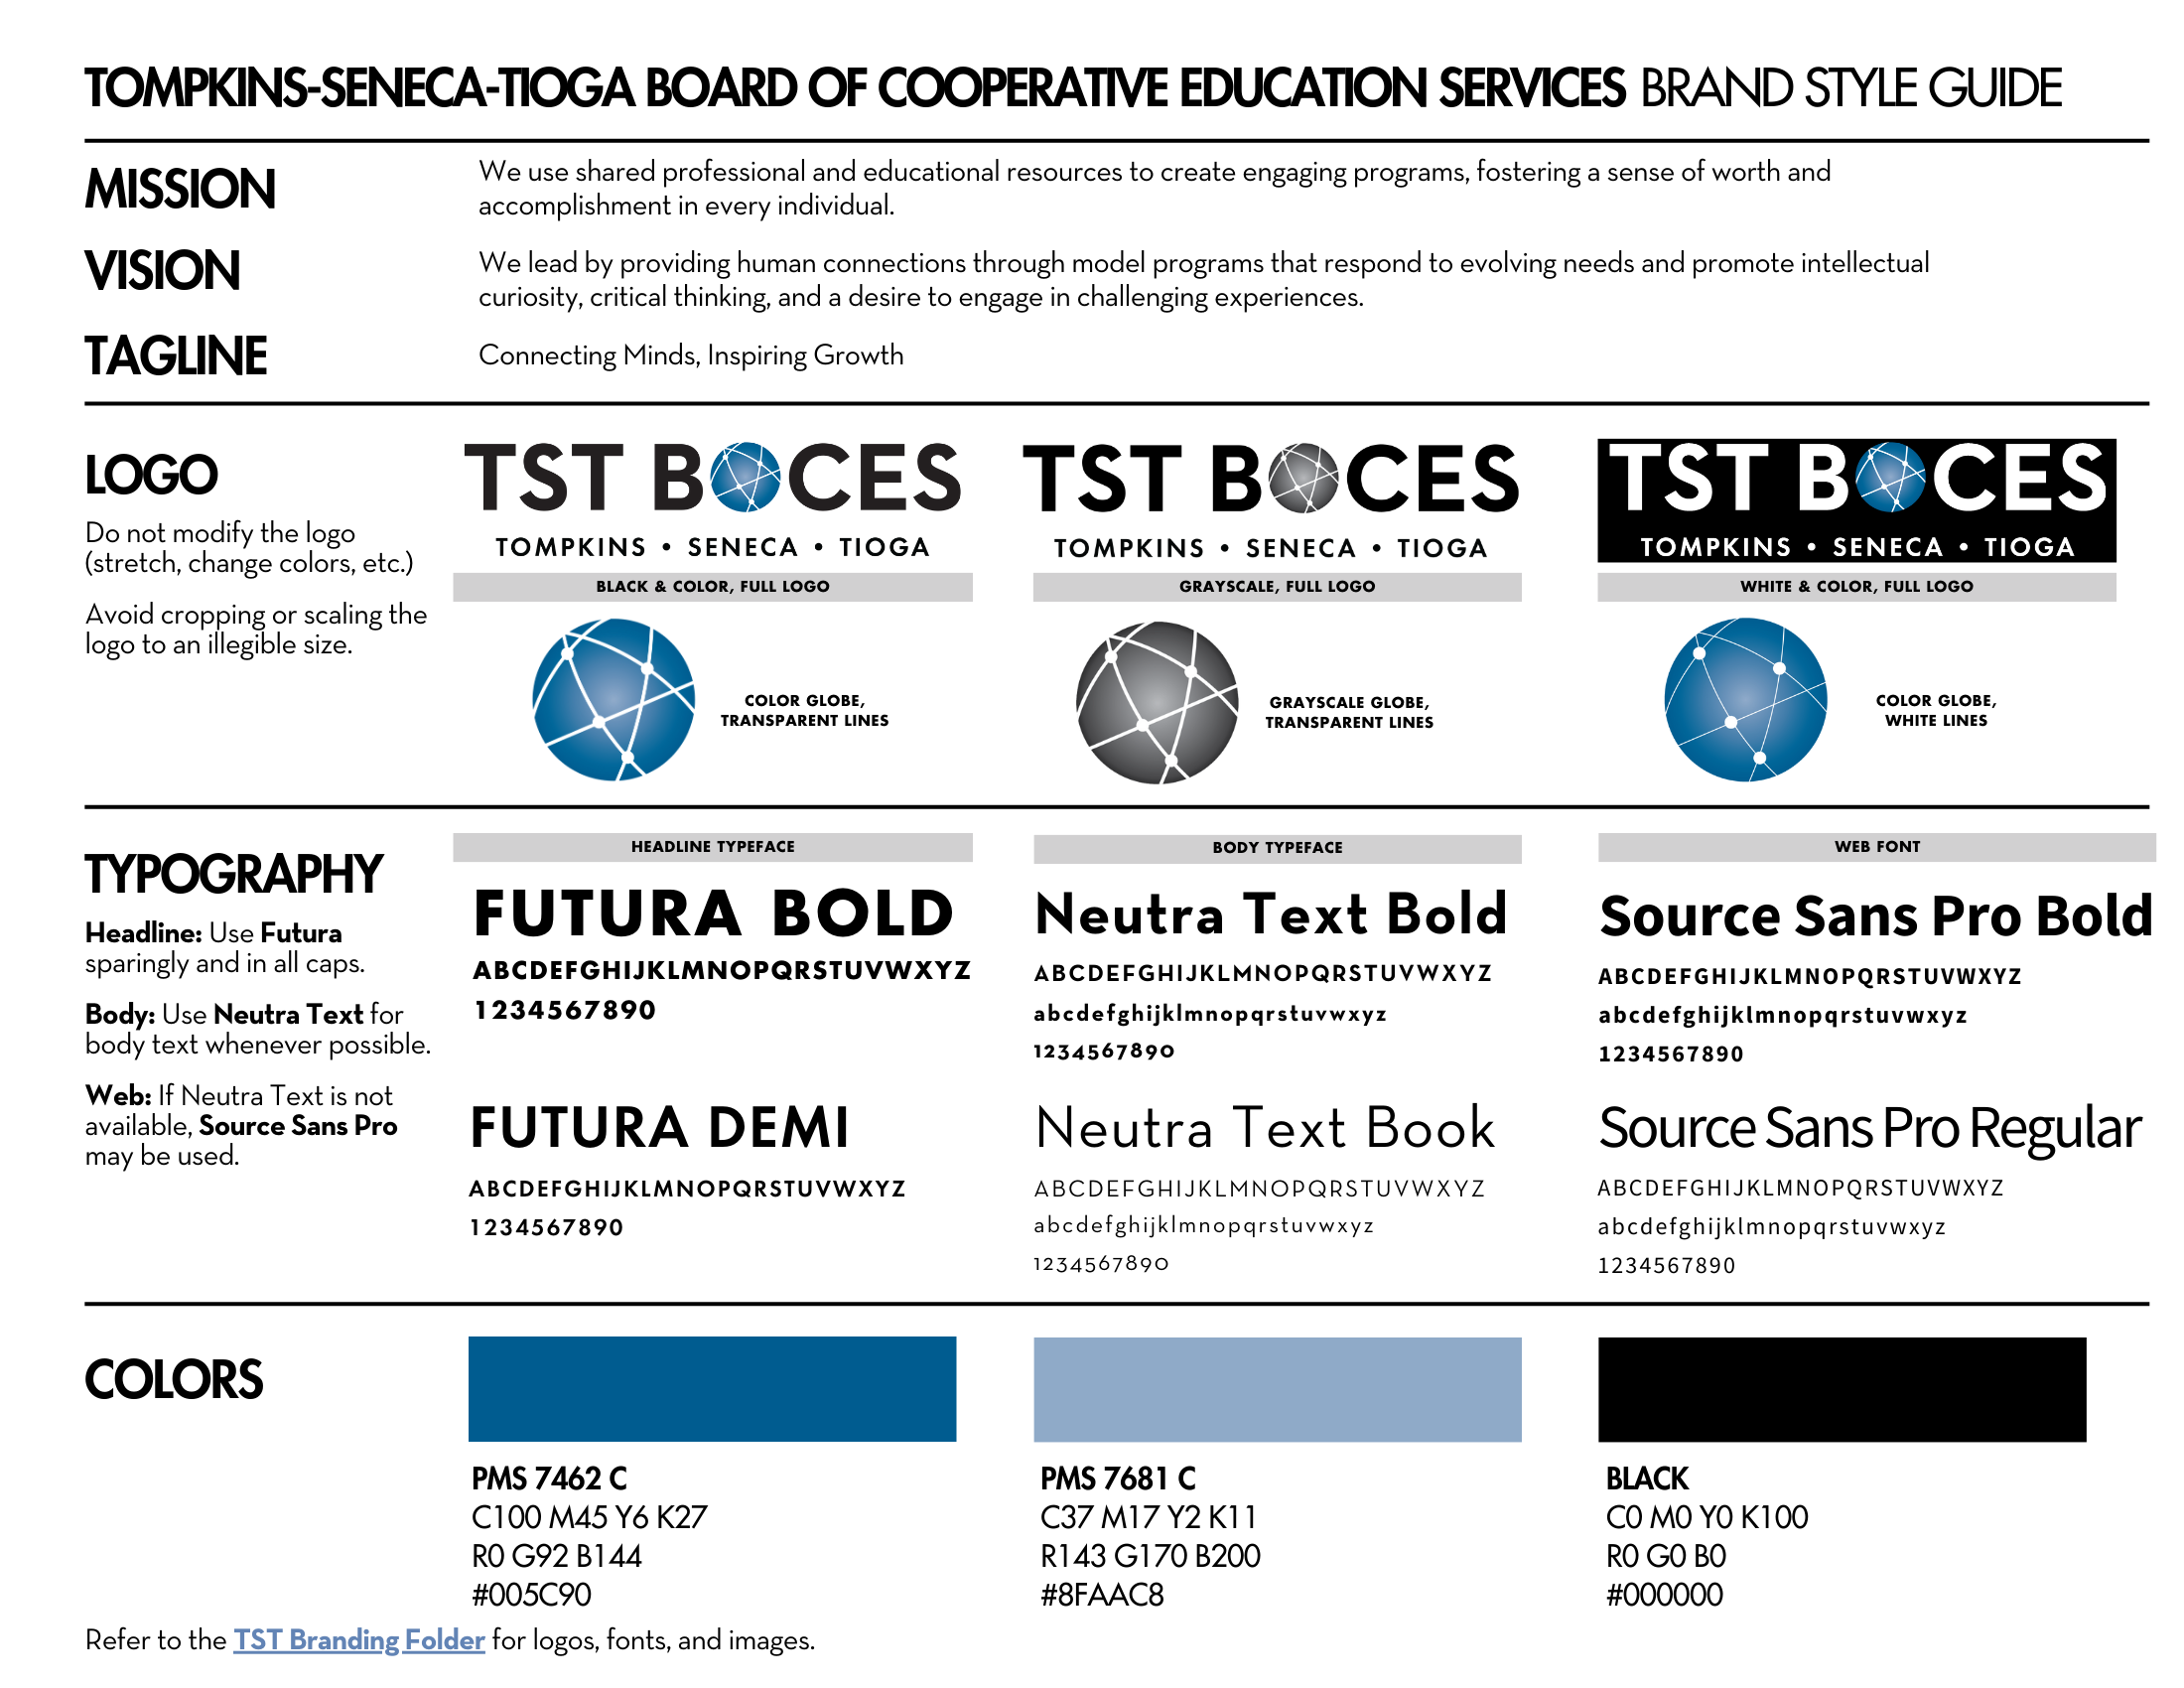 TST BOCES Brand Style Guide